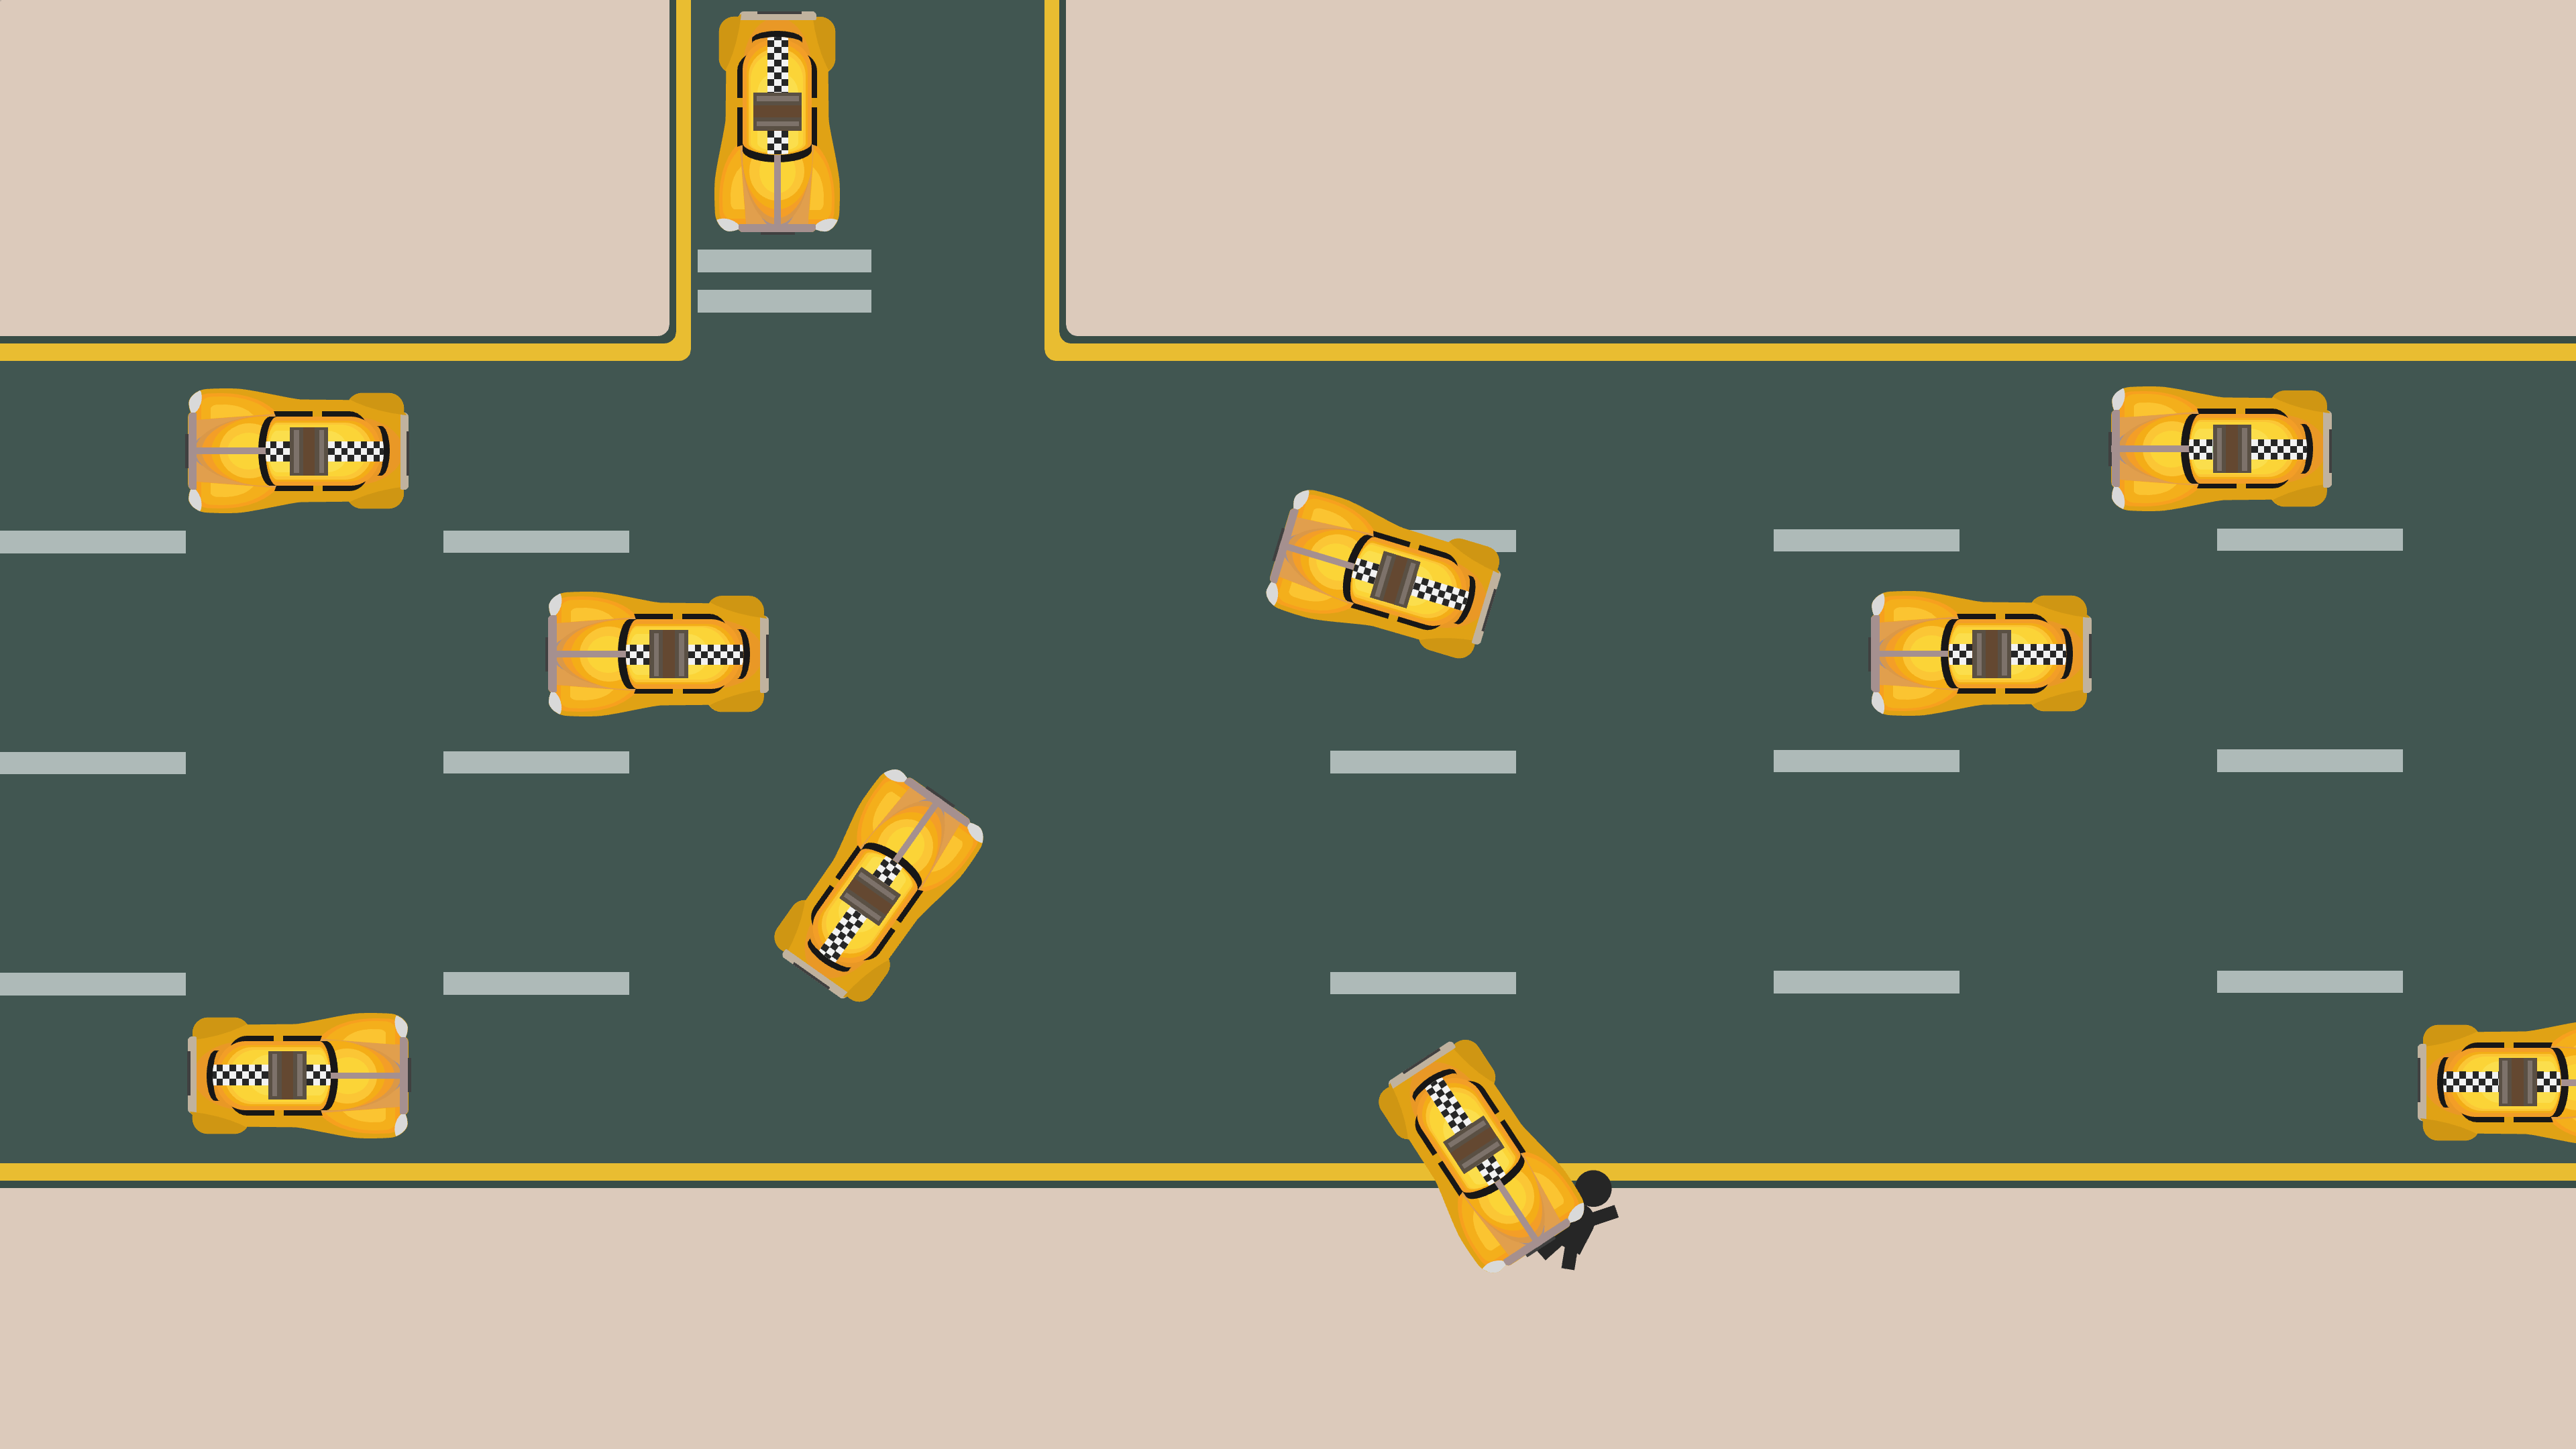 Spoof of GTA2, where all cars have been replaced by taxis. One of the taxis is driving over a pedestrian.
